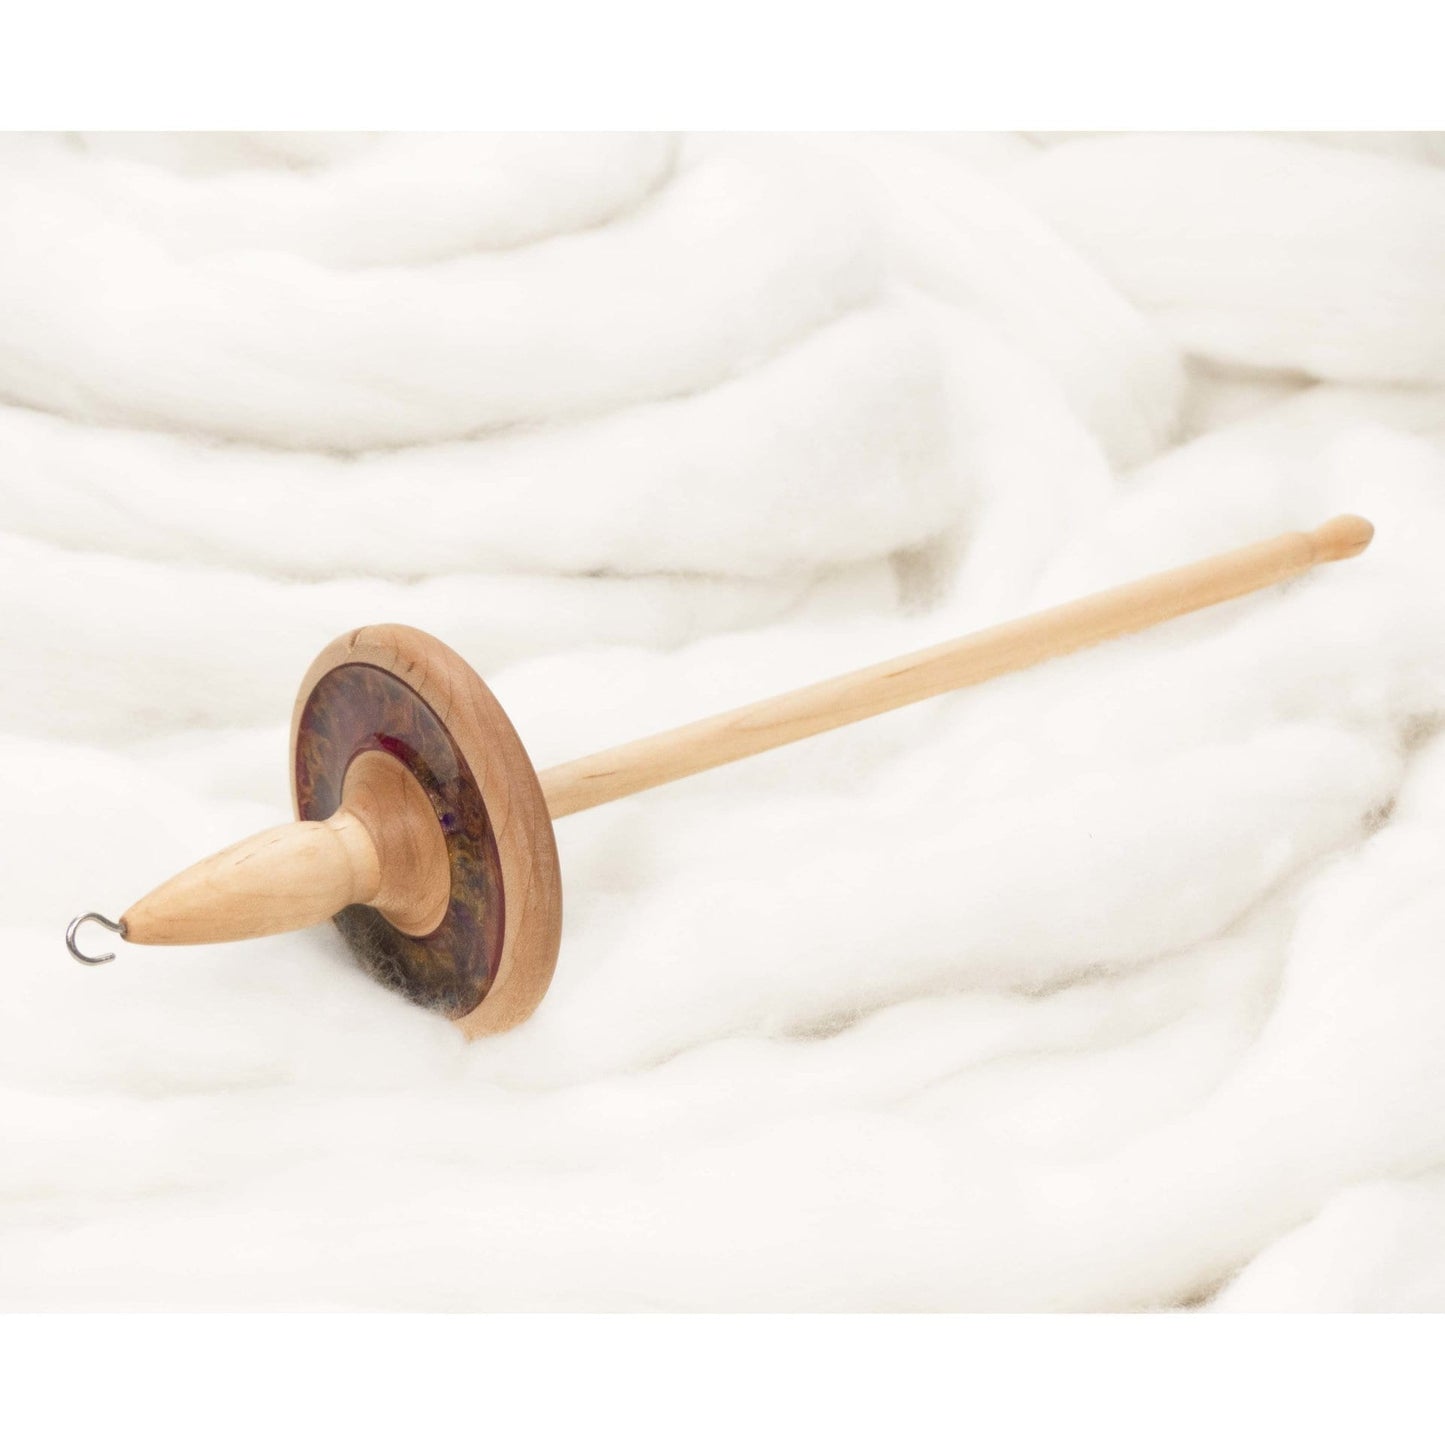 Llampetia - Nebula Mica Inlay / Hand-Turned Maple Wood Drop Spindle Heavyweight - Top Whorl 47 Grams